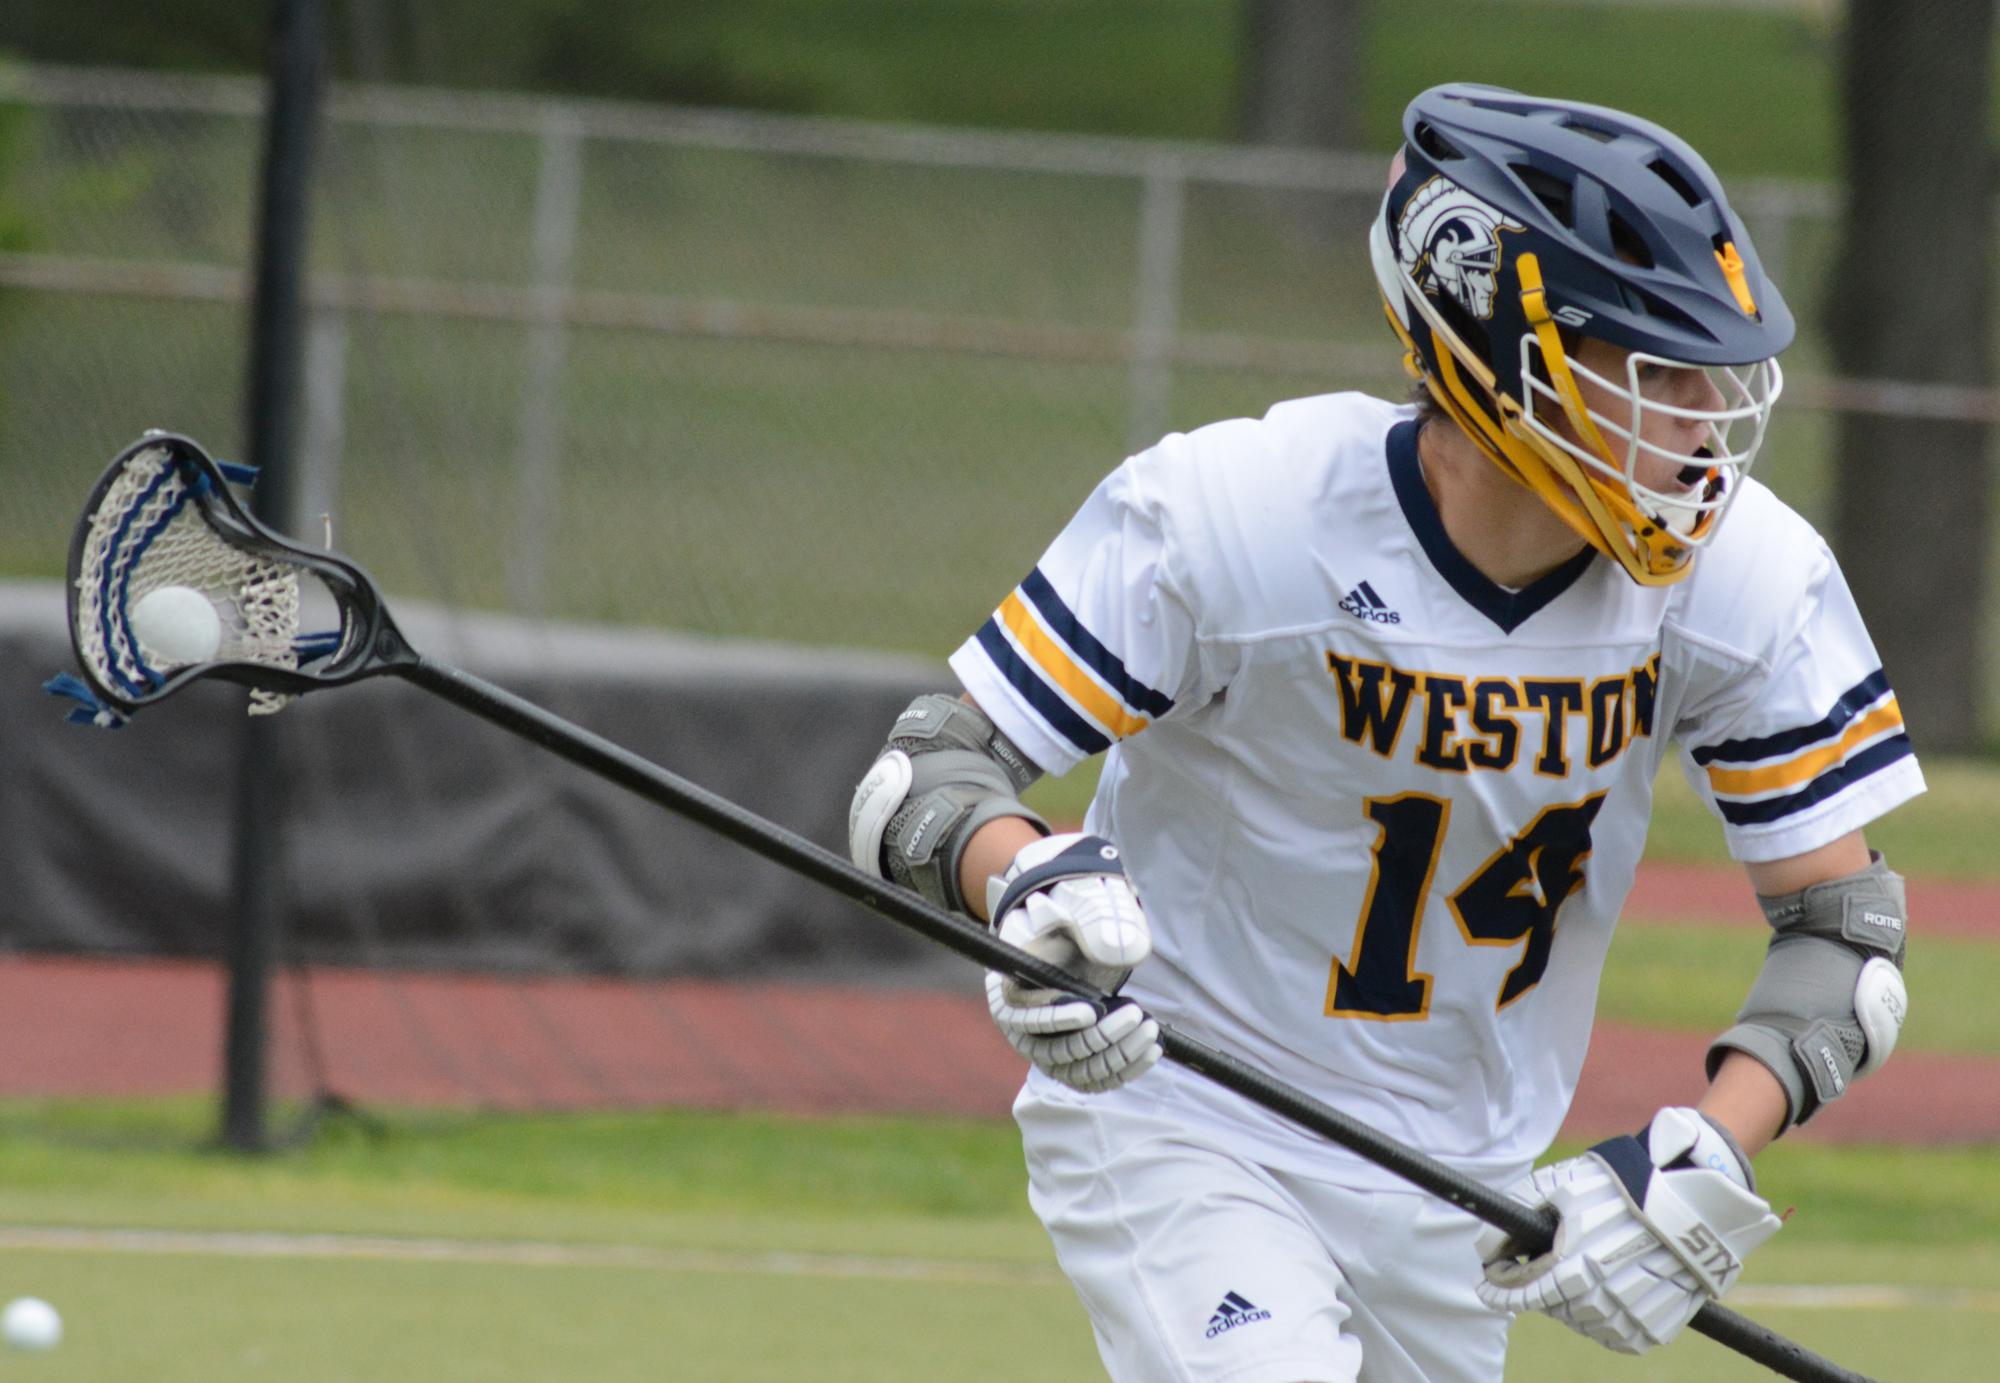 2022 CIAC Boys Lacrosse tournament Storylines, top players and predictions